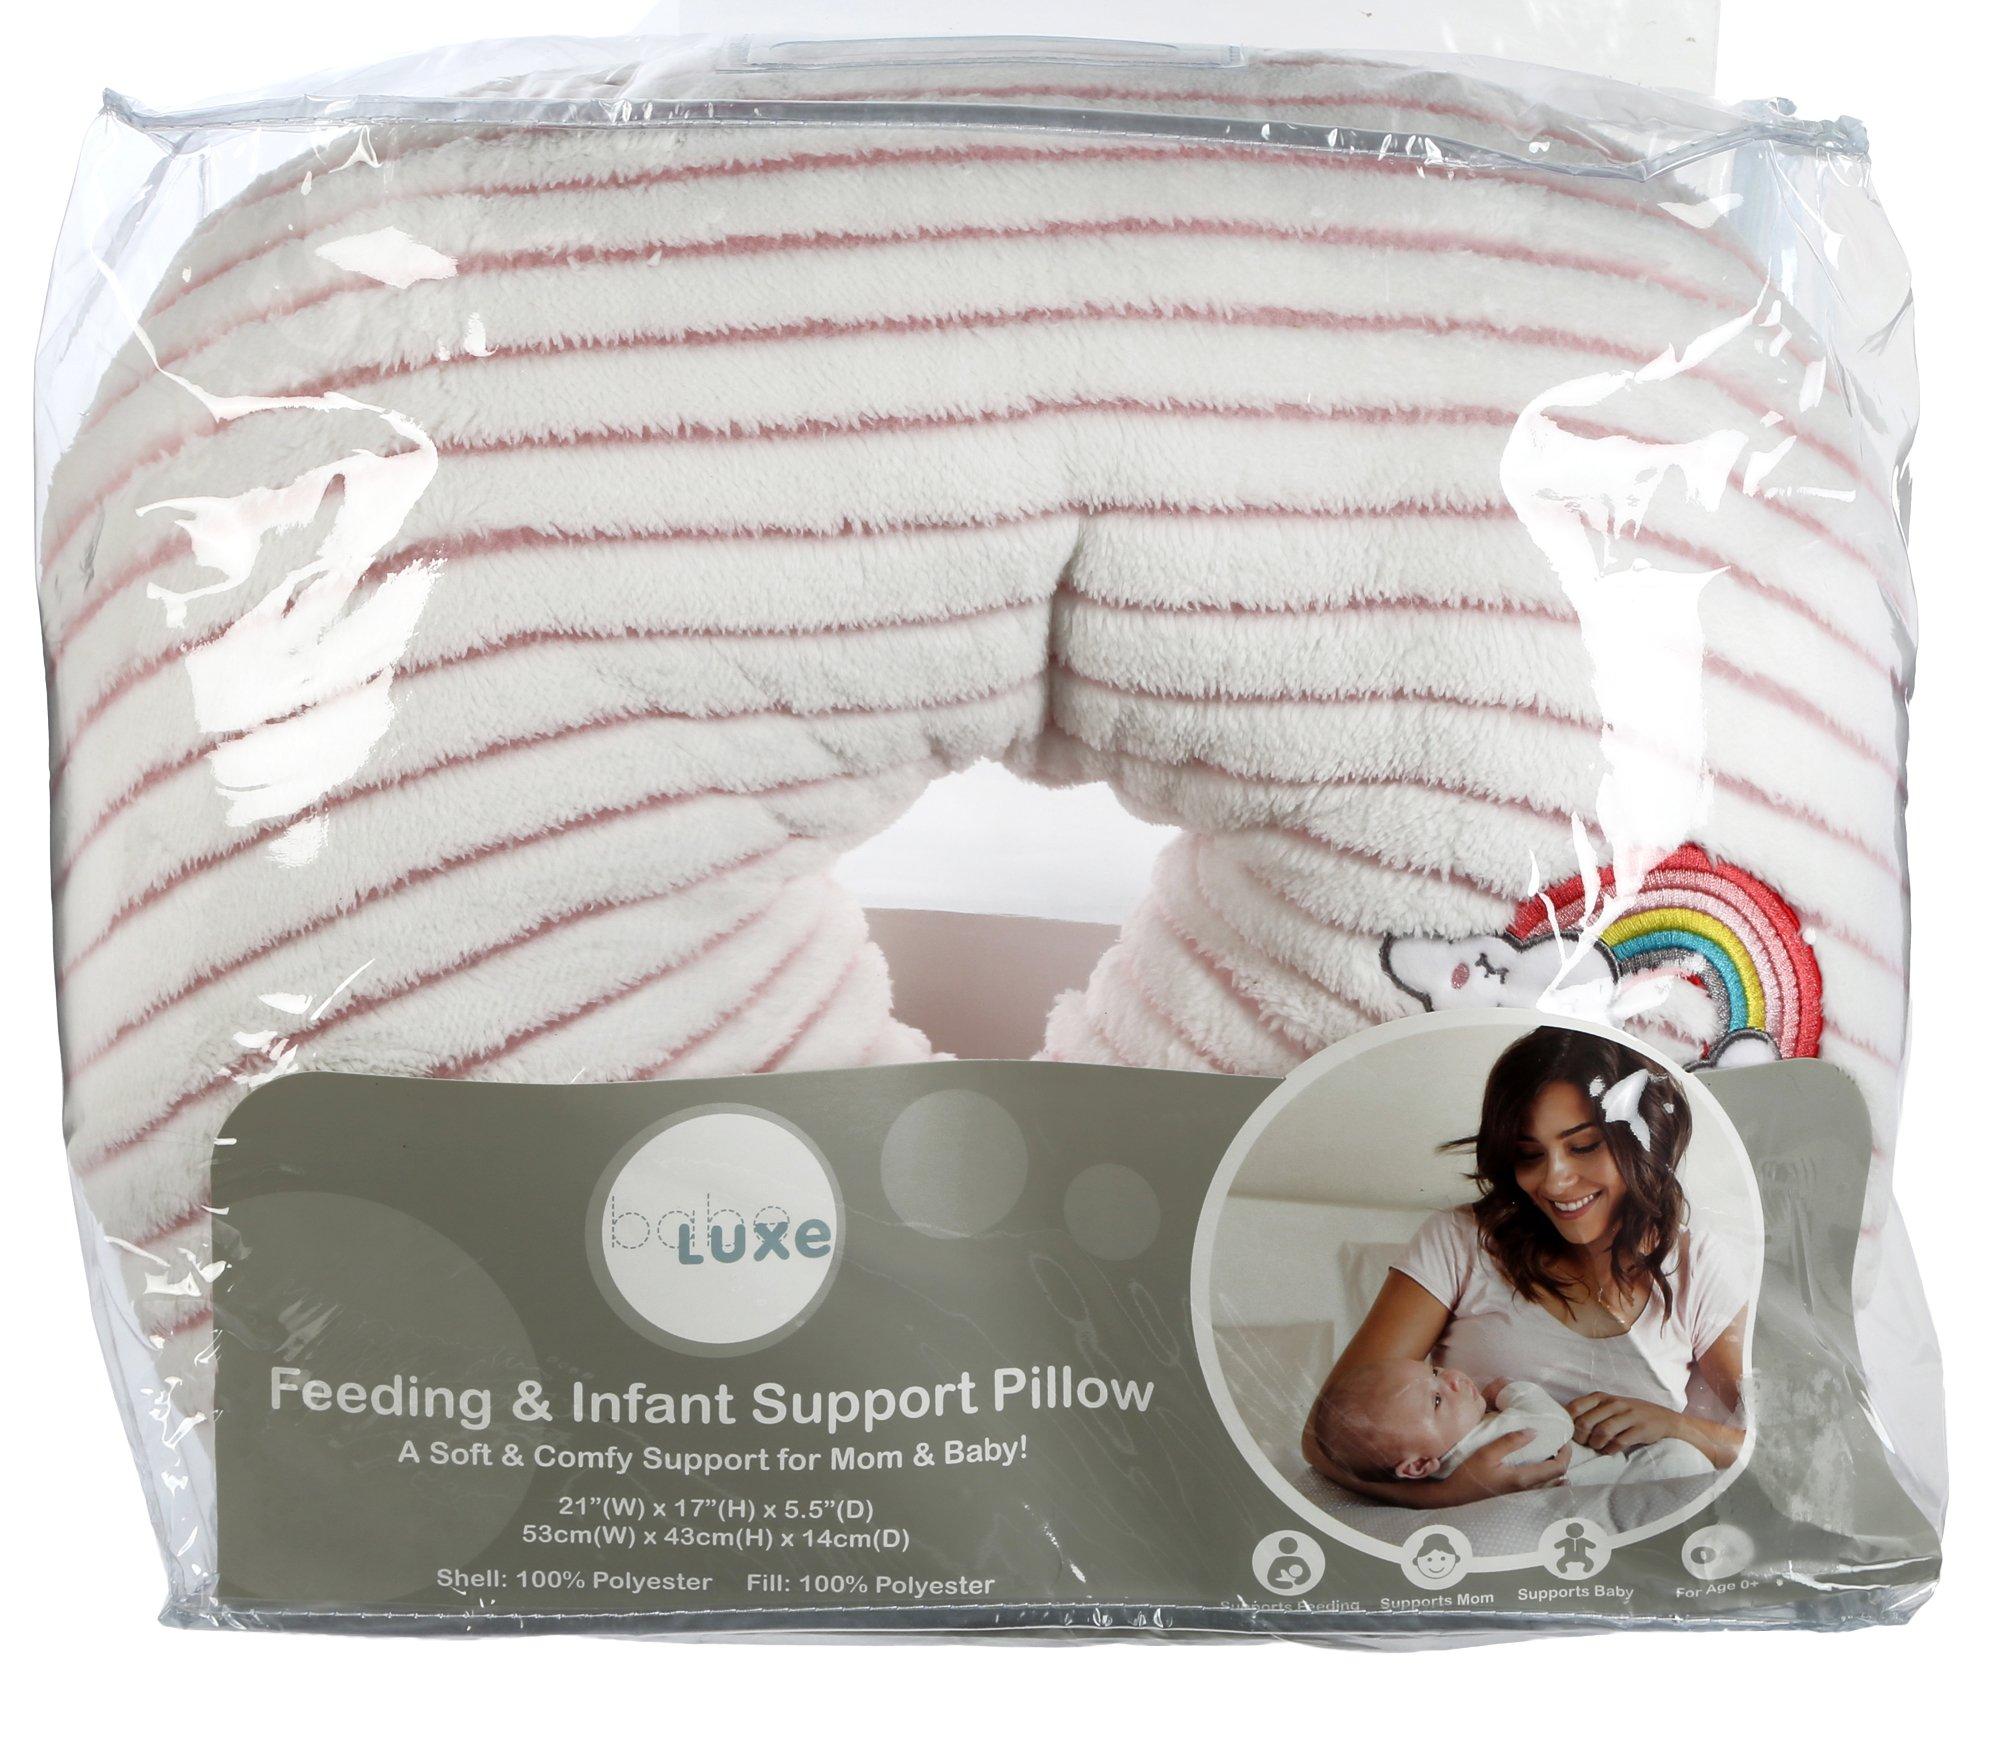 babe luxe feeding and infant support pillow